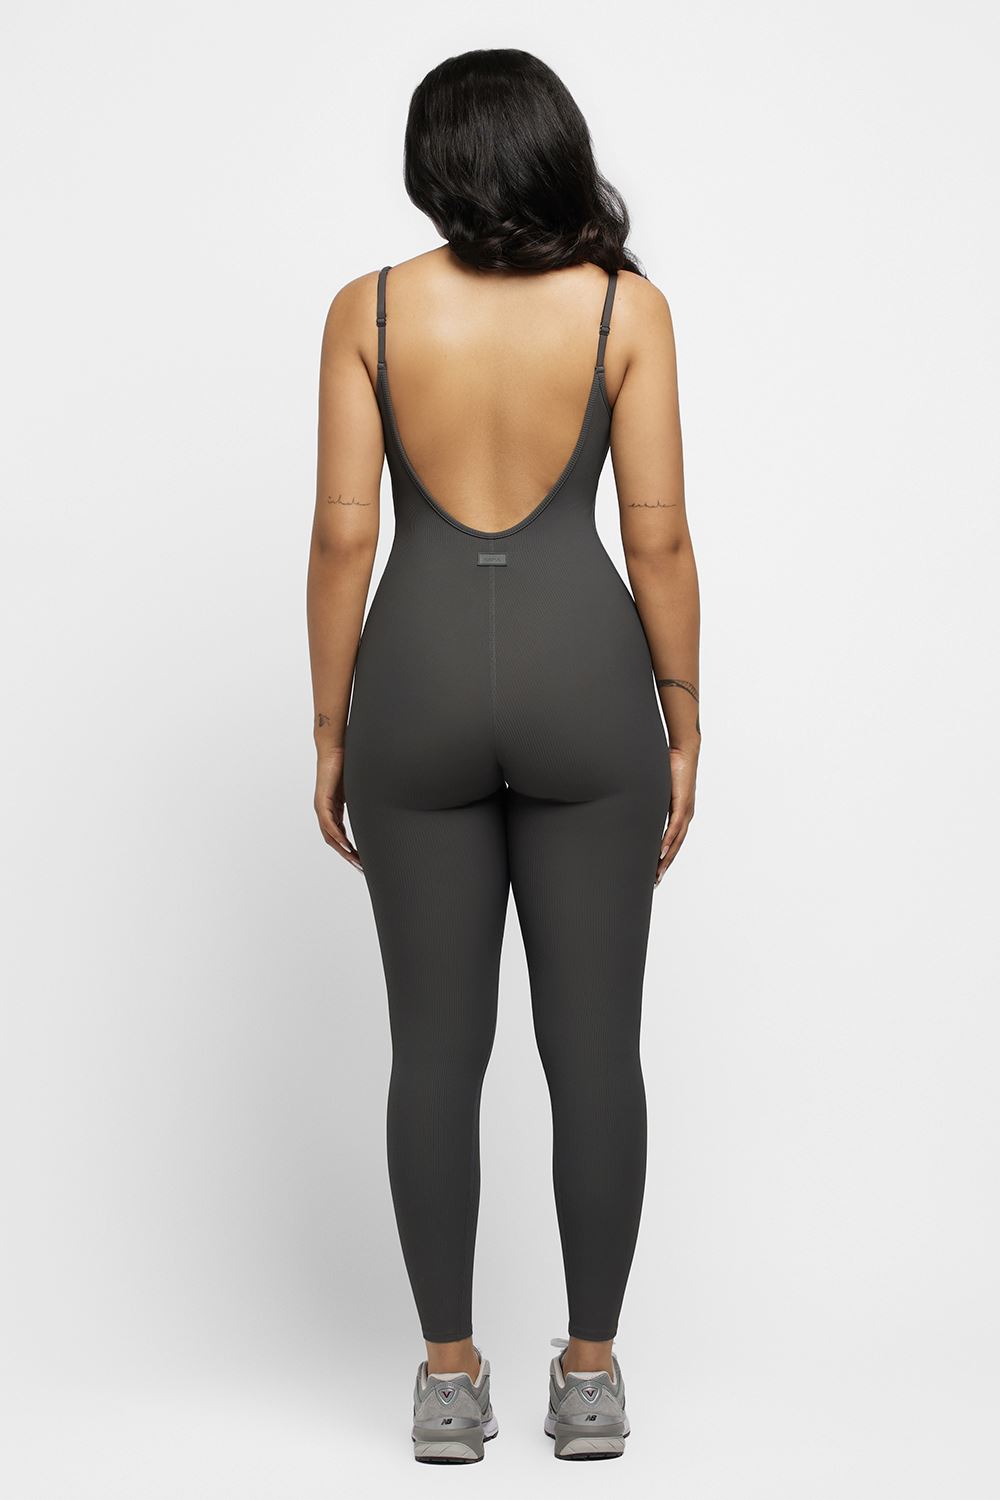 One Piece Move Theology Black Jumpsuit Activewear size medium - $28 - From J